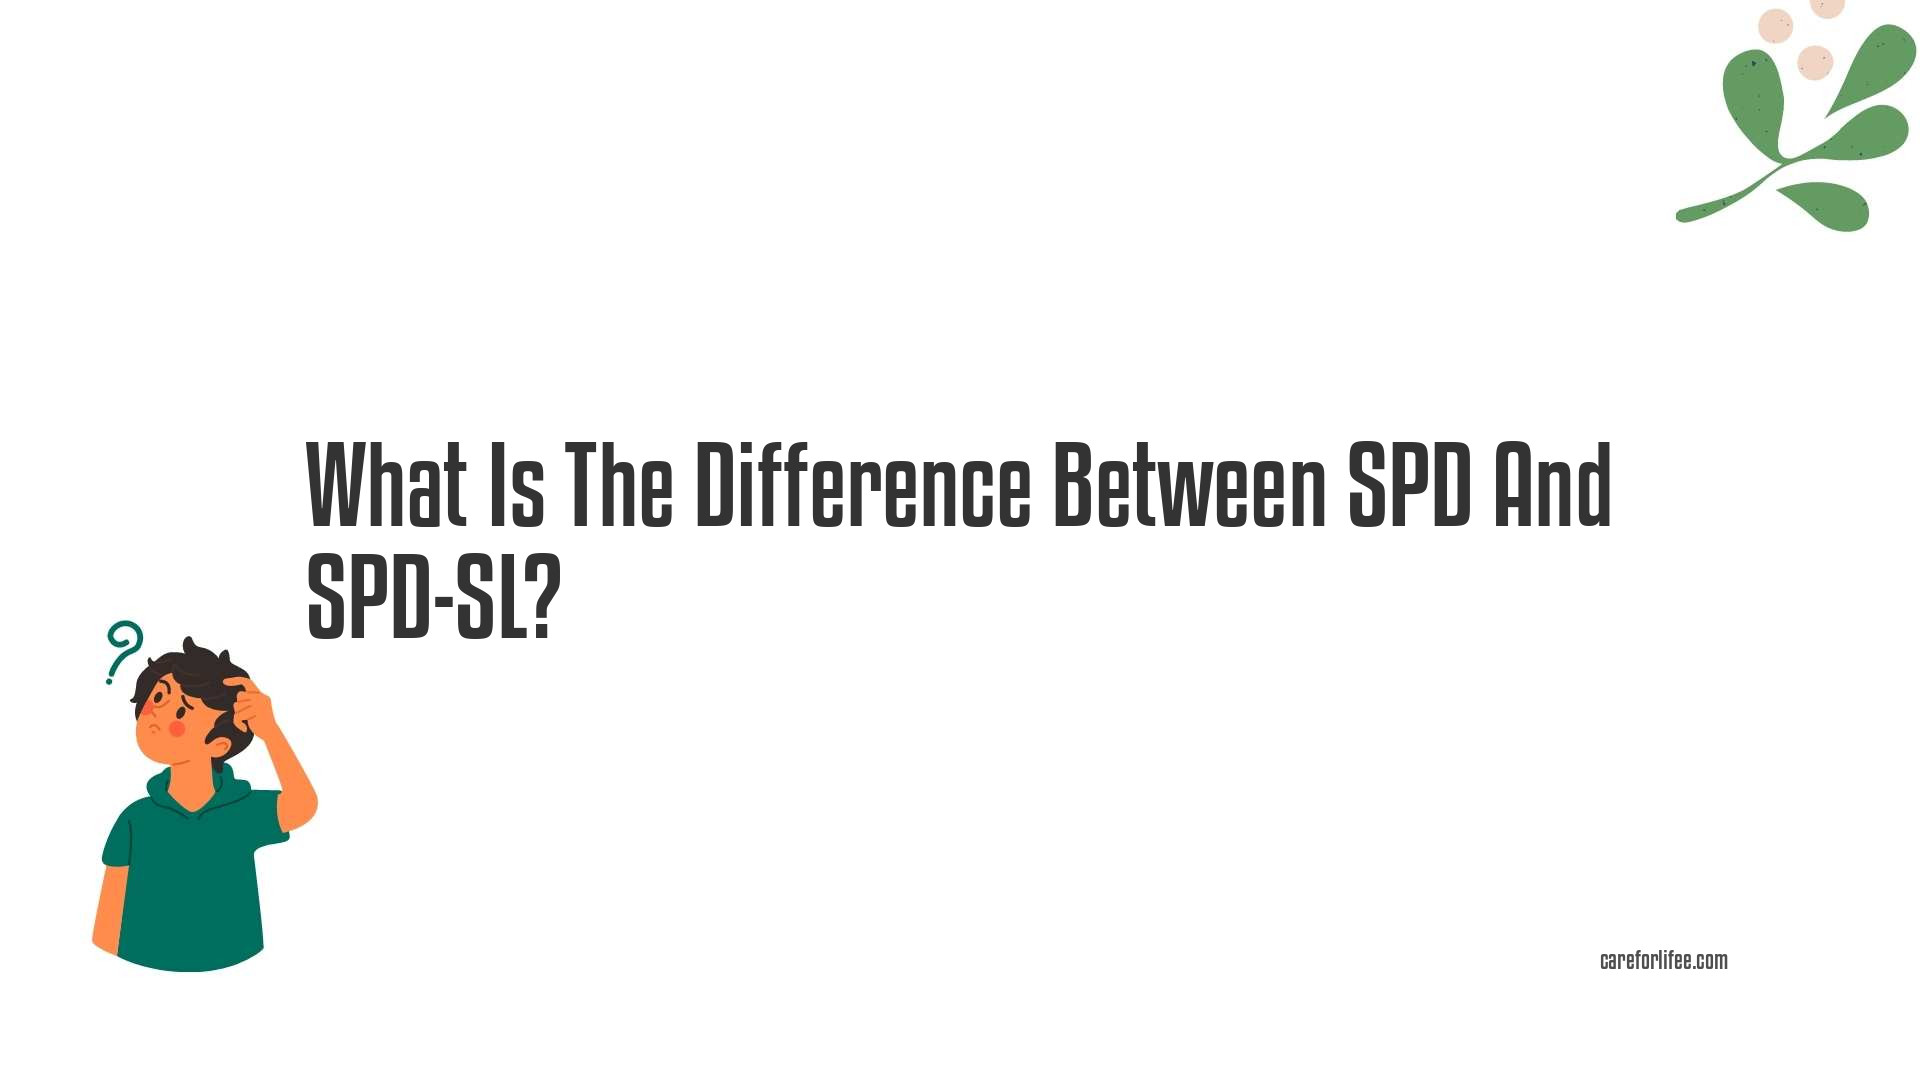 What Is The Difference Between SPD And SPD-SL?